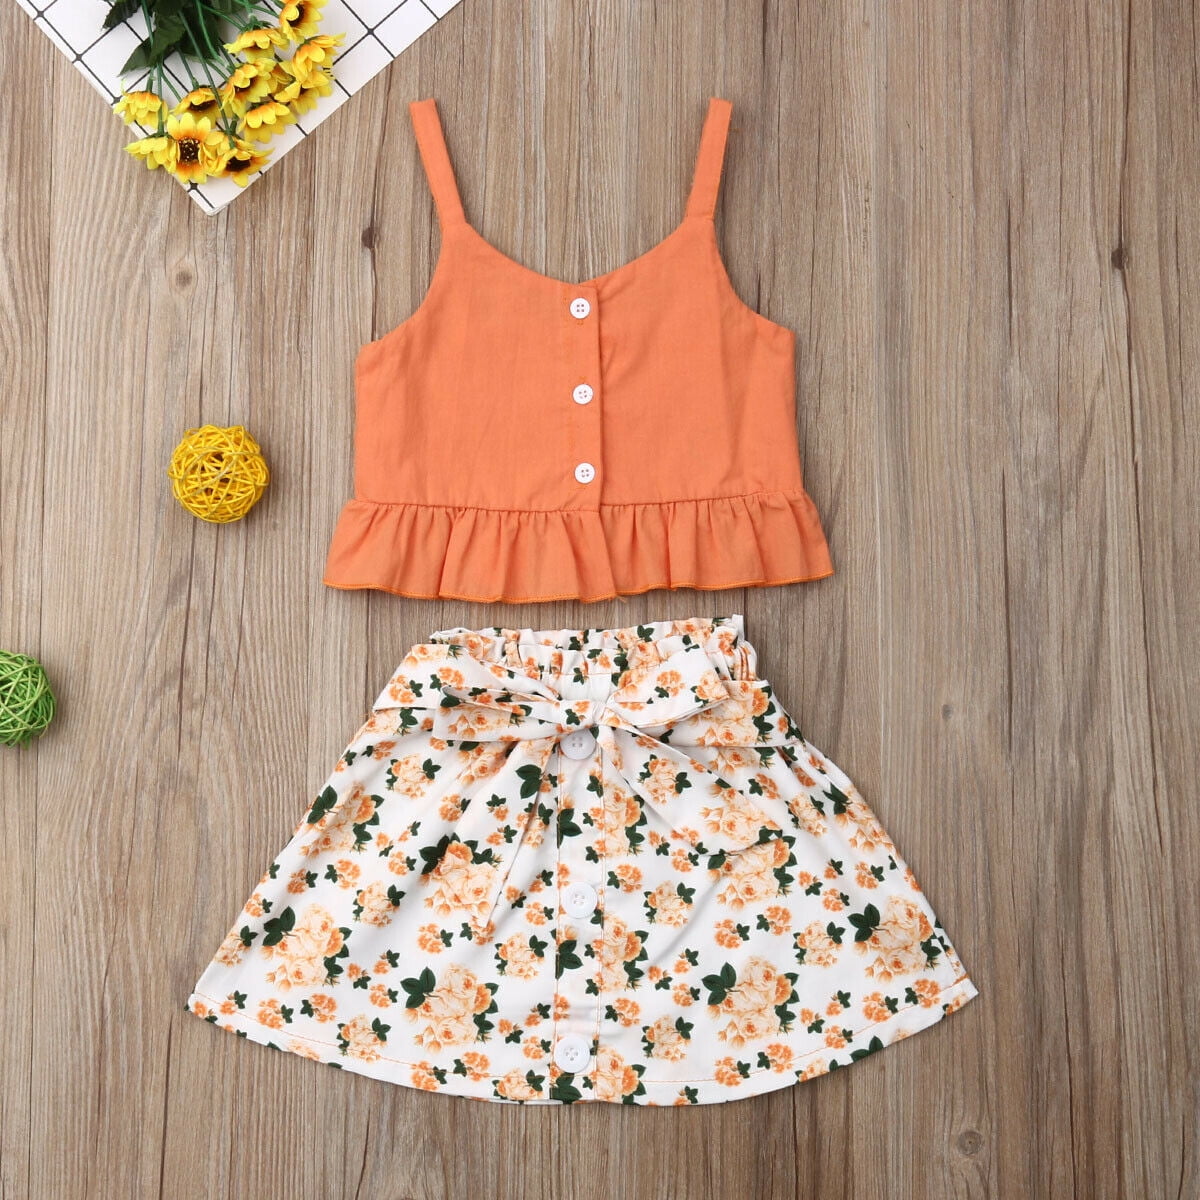 2Piece Toddler Baby Girls Outfits Set,Sleeveless Embroidery Floral Print Vest Tanks Top Plaid Skirts for Summer